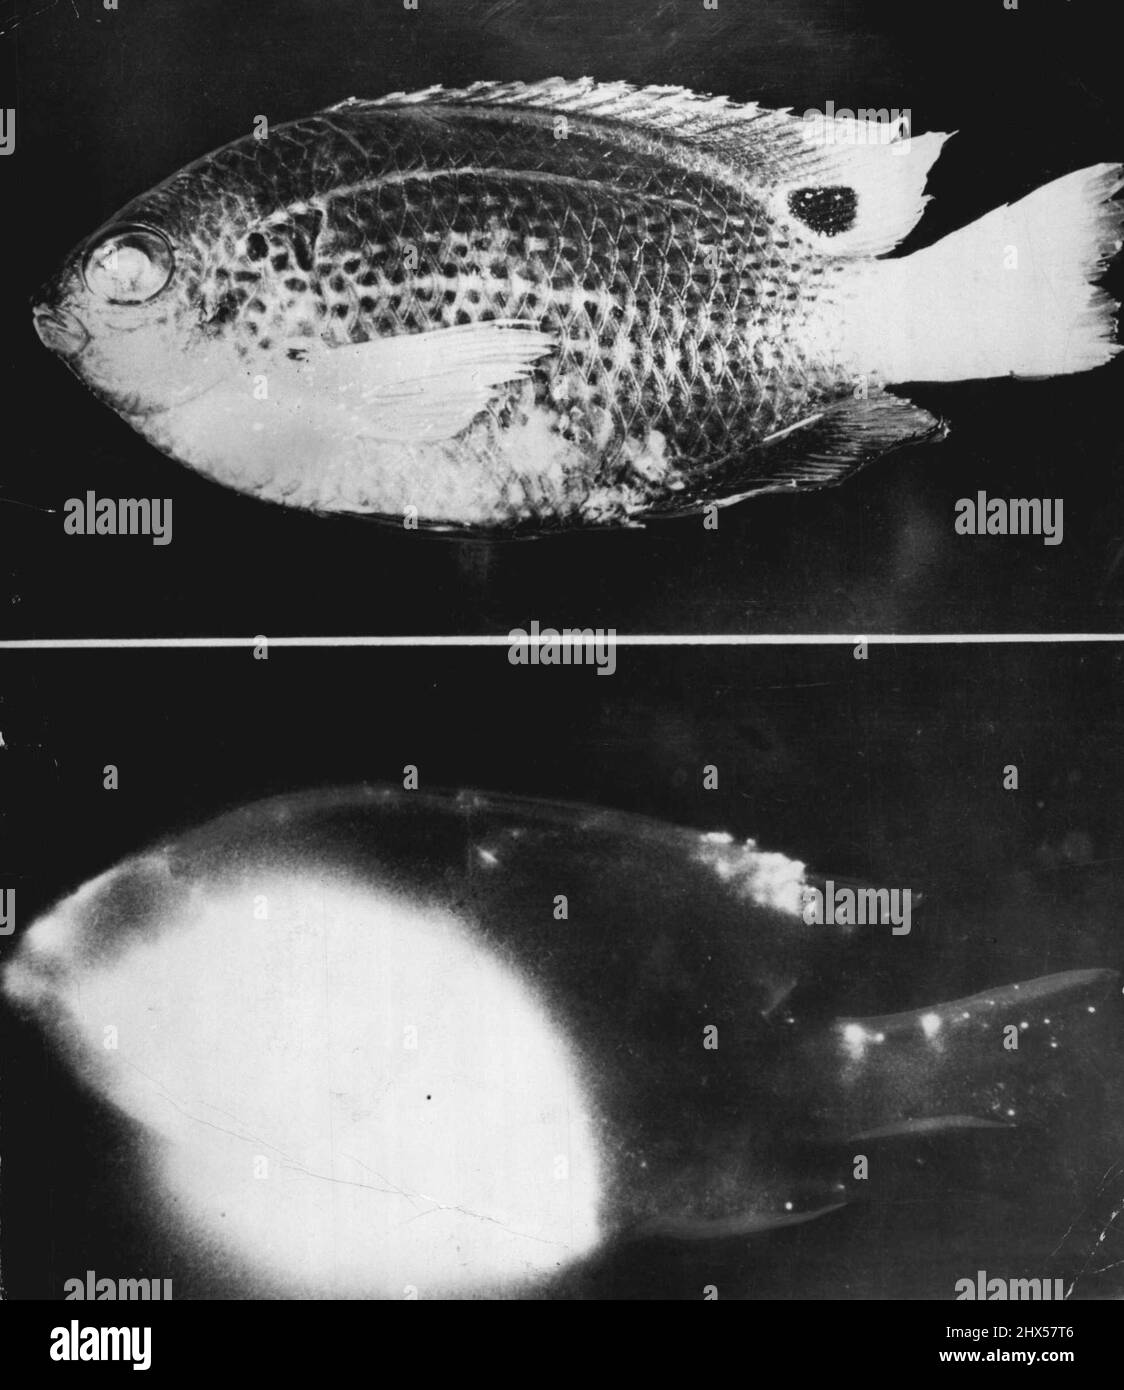 Bikini Fish Contaminated -- At top is photo of a damsel fish caught in bikini lagoon after the explosion there of an atomic bomb. At bottom is radio-autograph made at the University of Washington, showing how the digestive tract has accumulated radioactive material picked up in food. Sports on fins show surface contamination from radioactive particles in the water. Photo at top was made with normal lighting using regular film. Bottom photo was made in darkness by placing the fish alongside a film highly sensitive to the radioactive material. July 29, 1949. (Photo by Associated Press Photo). Stock Photo